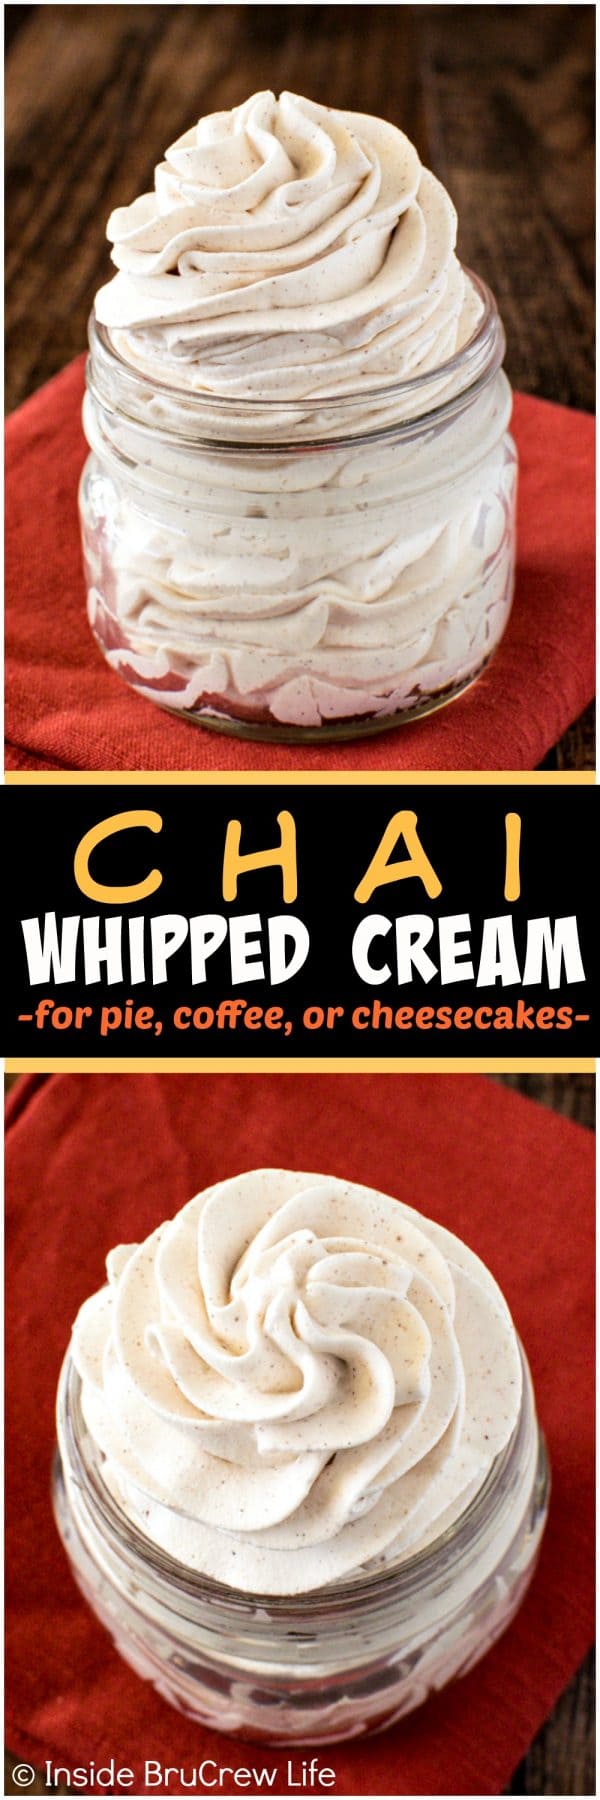 Chai Whipped Cream - adding spices makes this easy homemade recipe a great topping for desserts and coffee!